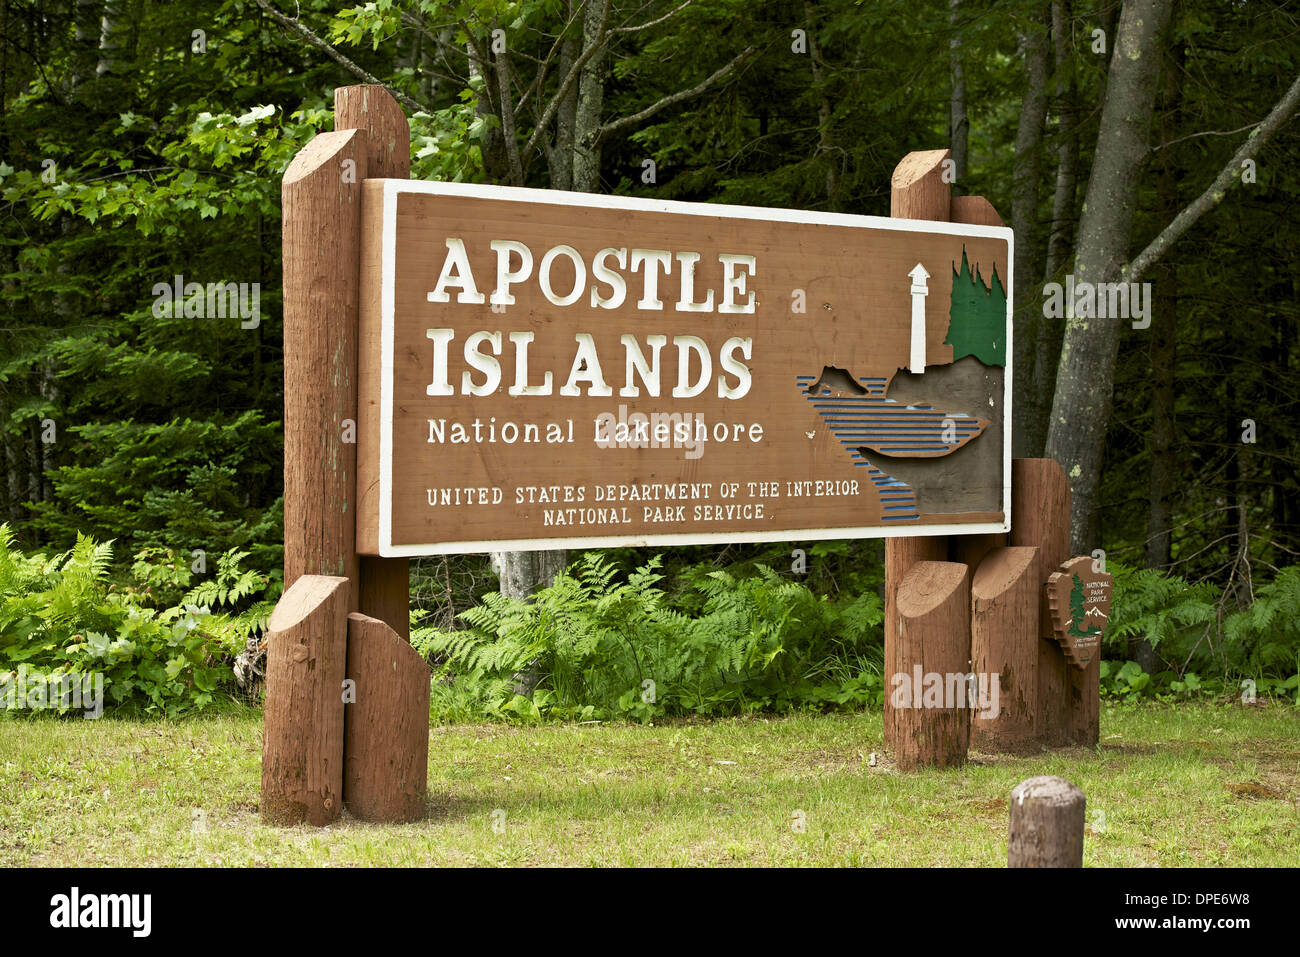 Apostle Islands National Lakeshore Entrance Sign. United States Department of the Interior National Park Service. Stock Photo